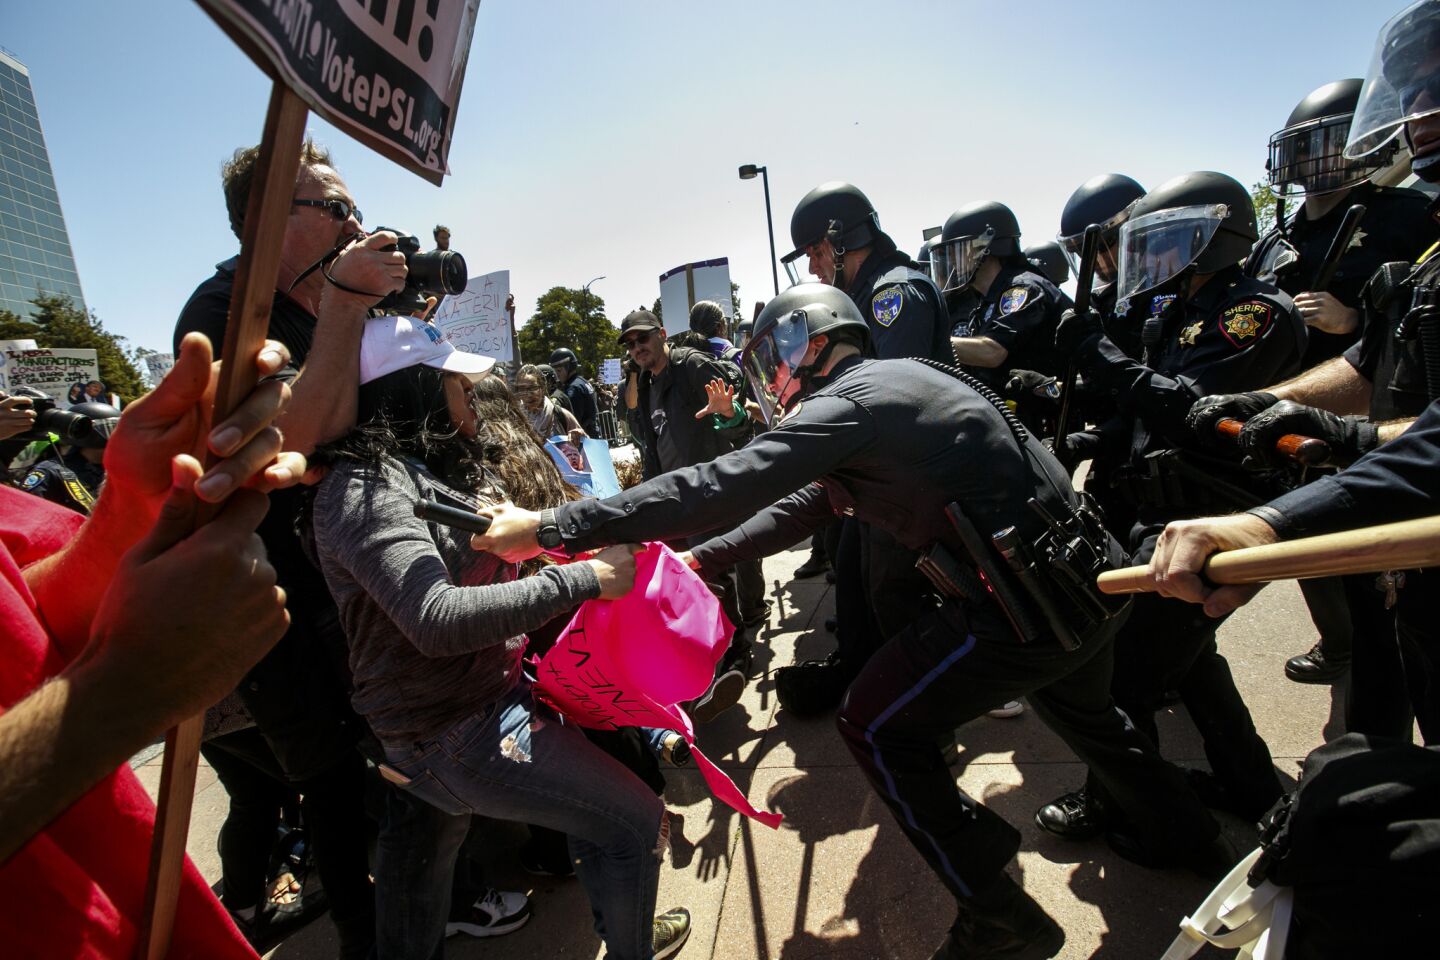 Donald Trump protesters clash with police outside the California Republican Convention in Burlingame on April 29, 2016.